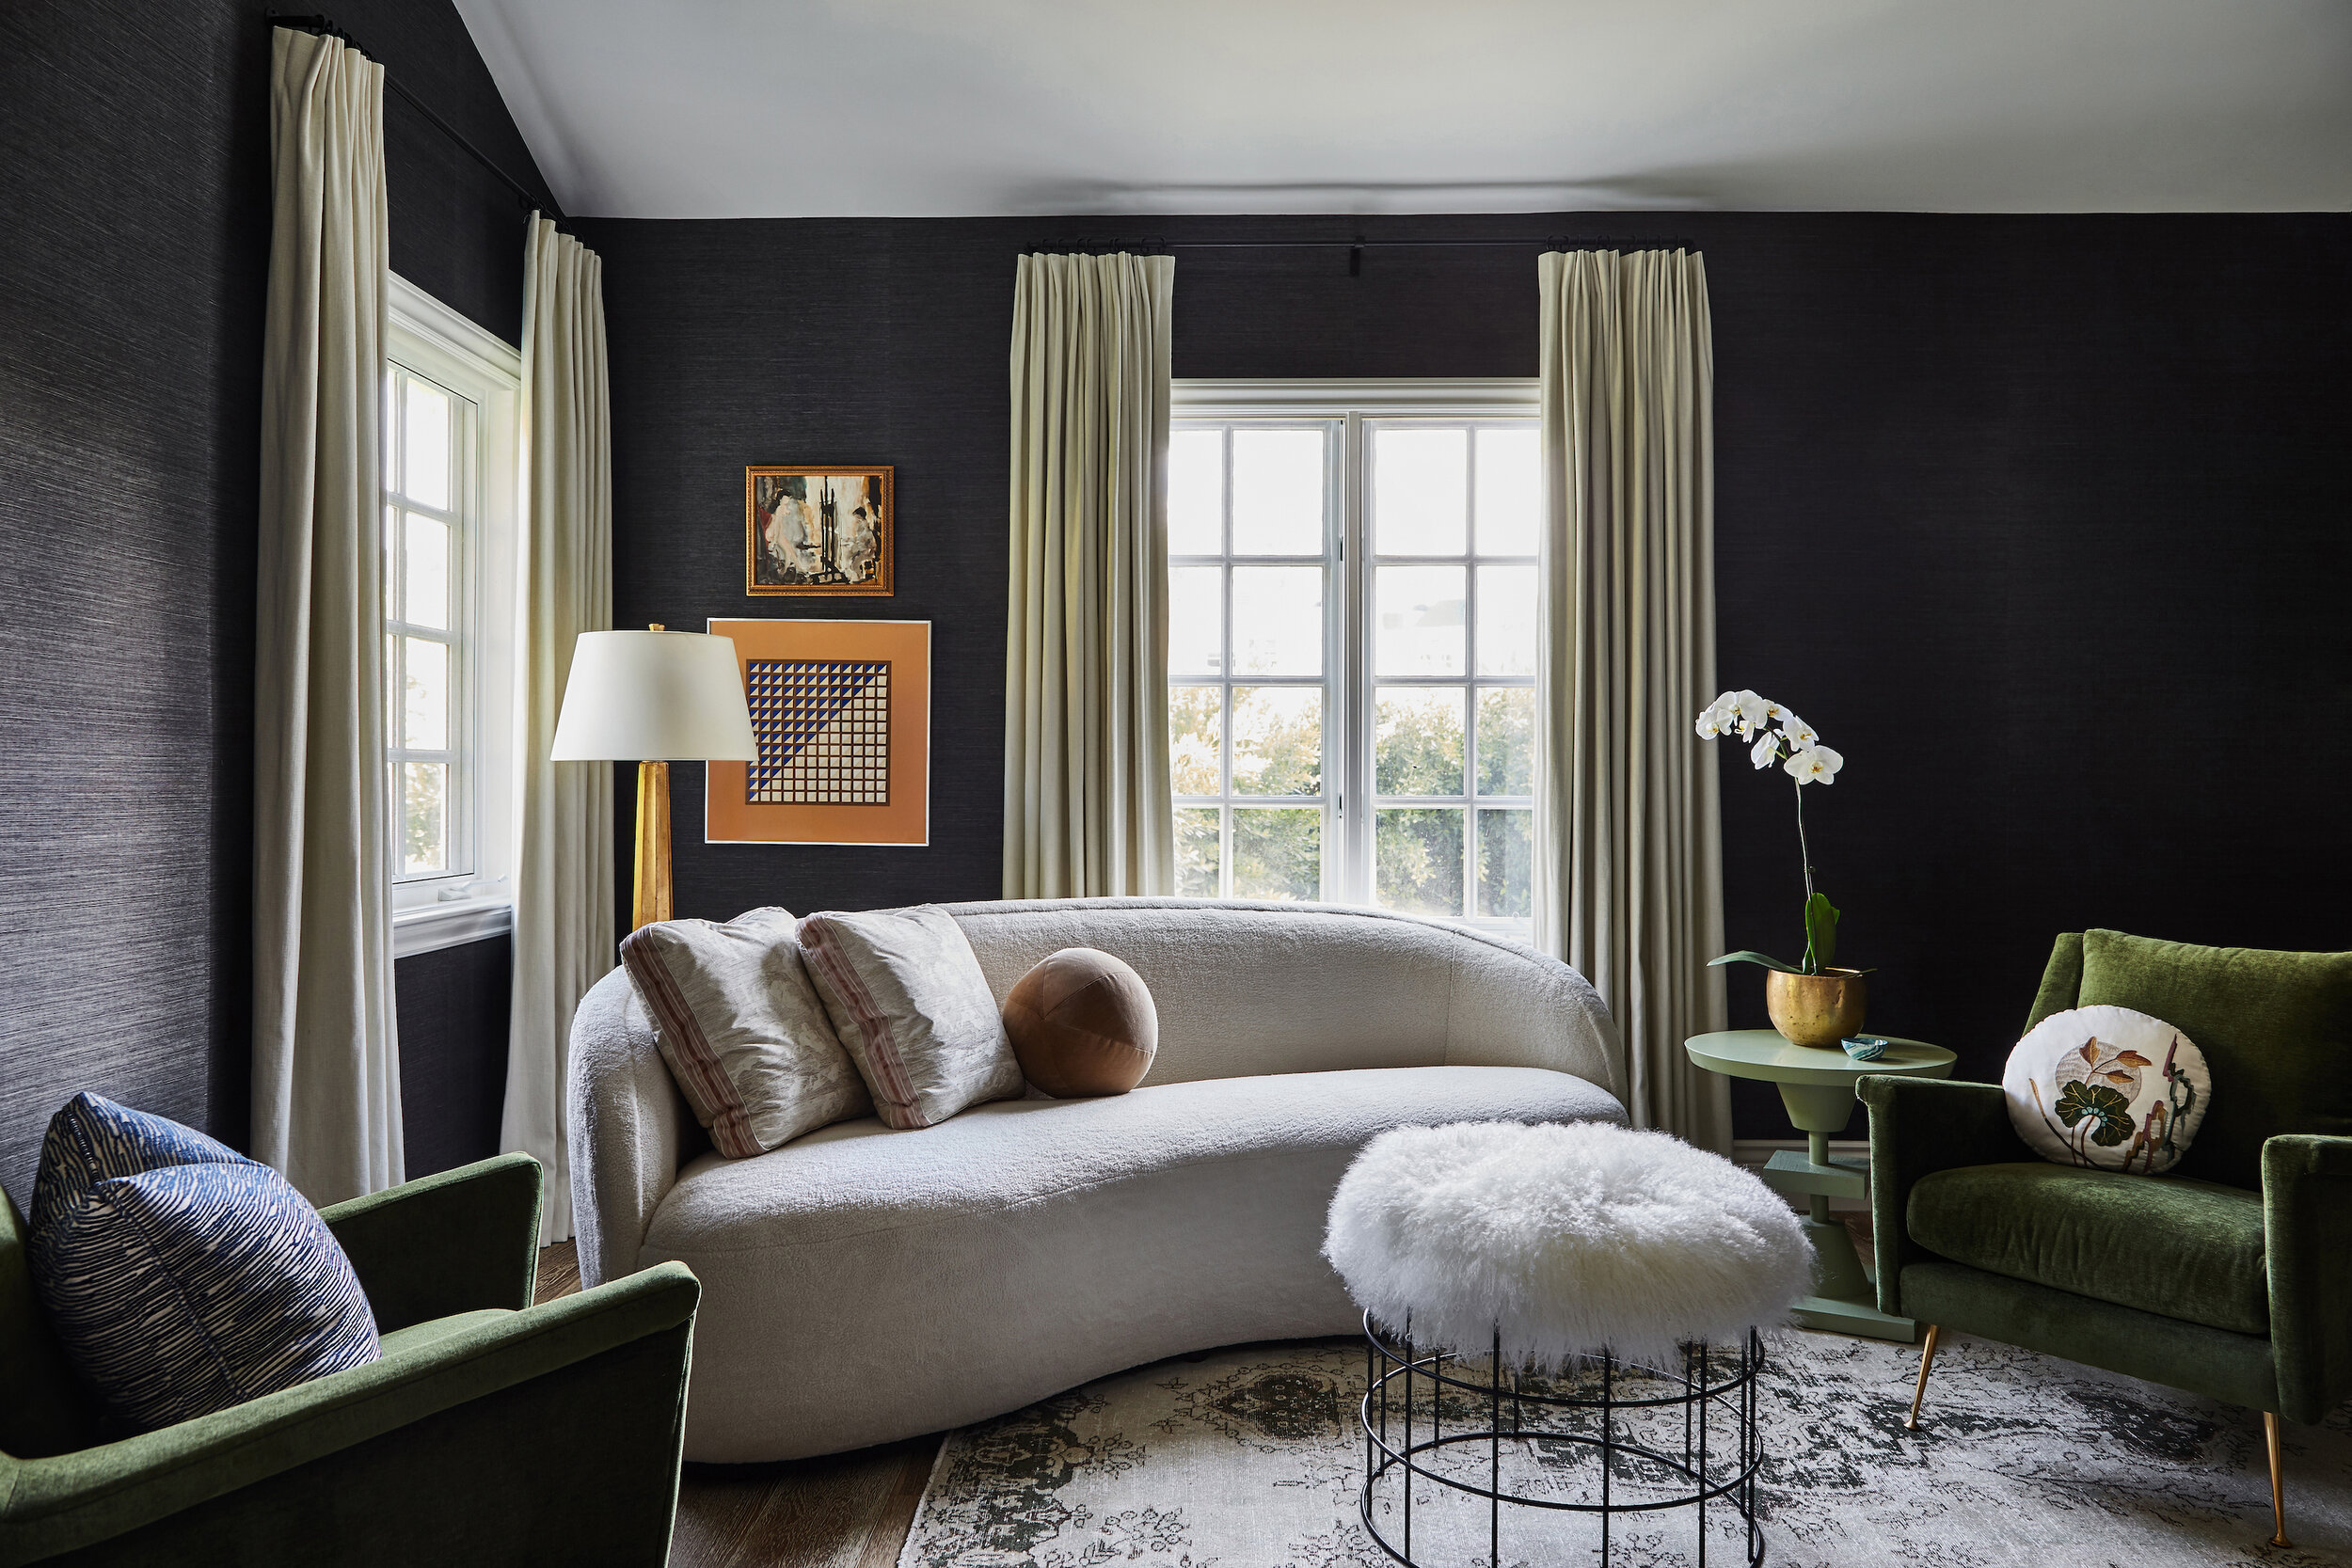  Moody Sitting Room with Dark Textured Walls  